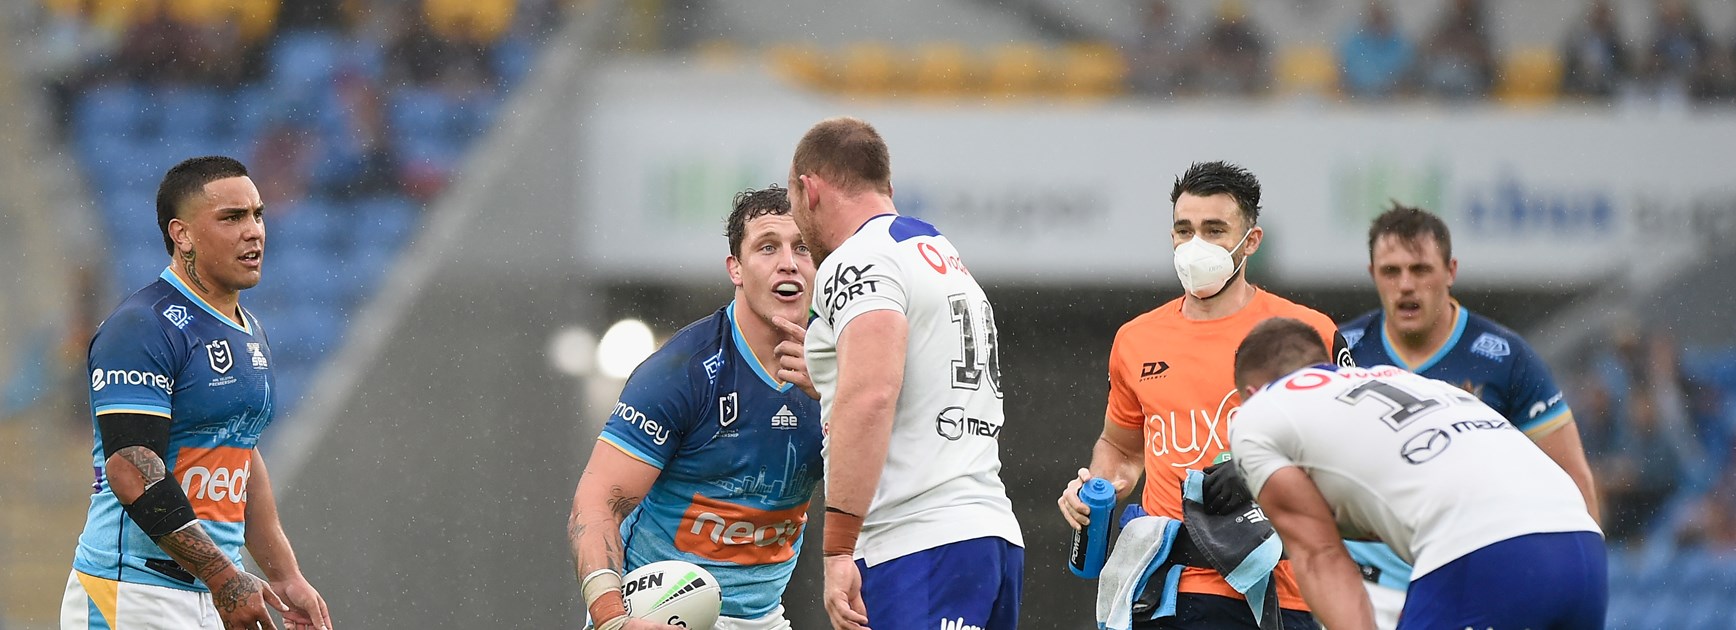 Rd 25 Charges: Fines for Titans, lengthy bans for Warriors